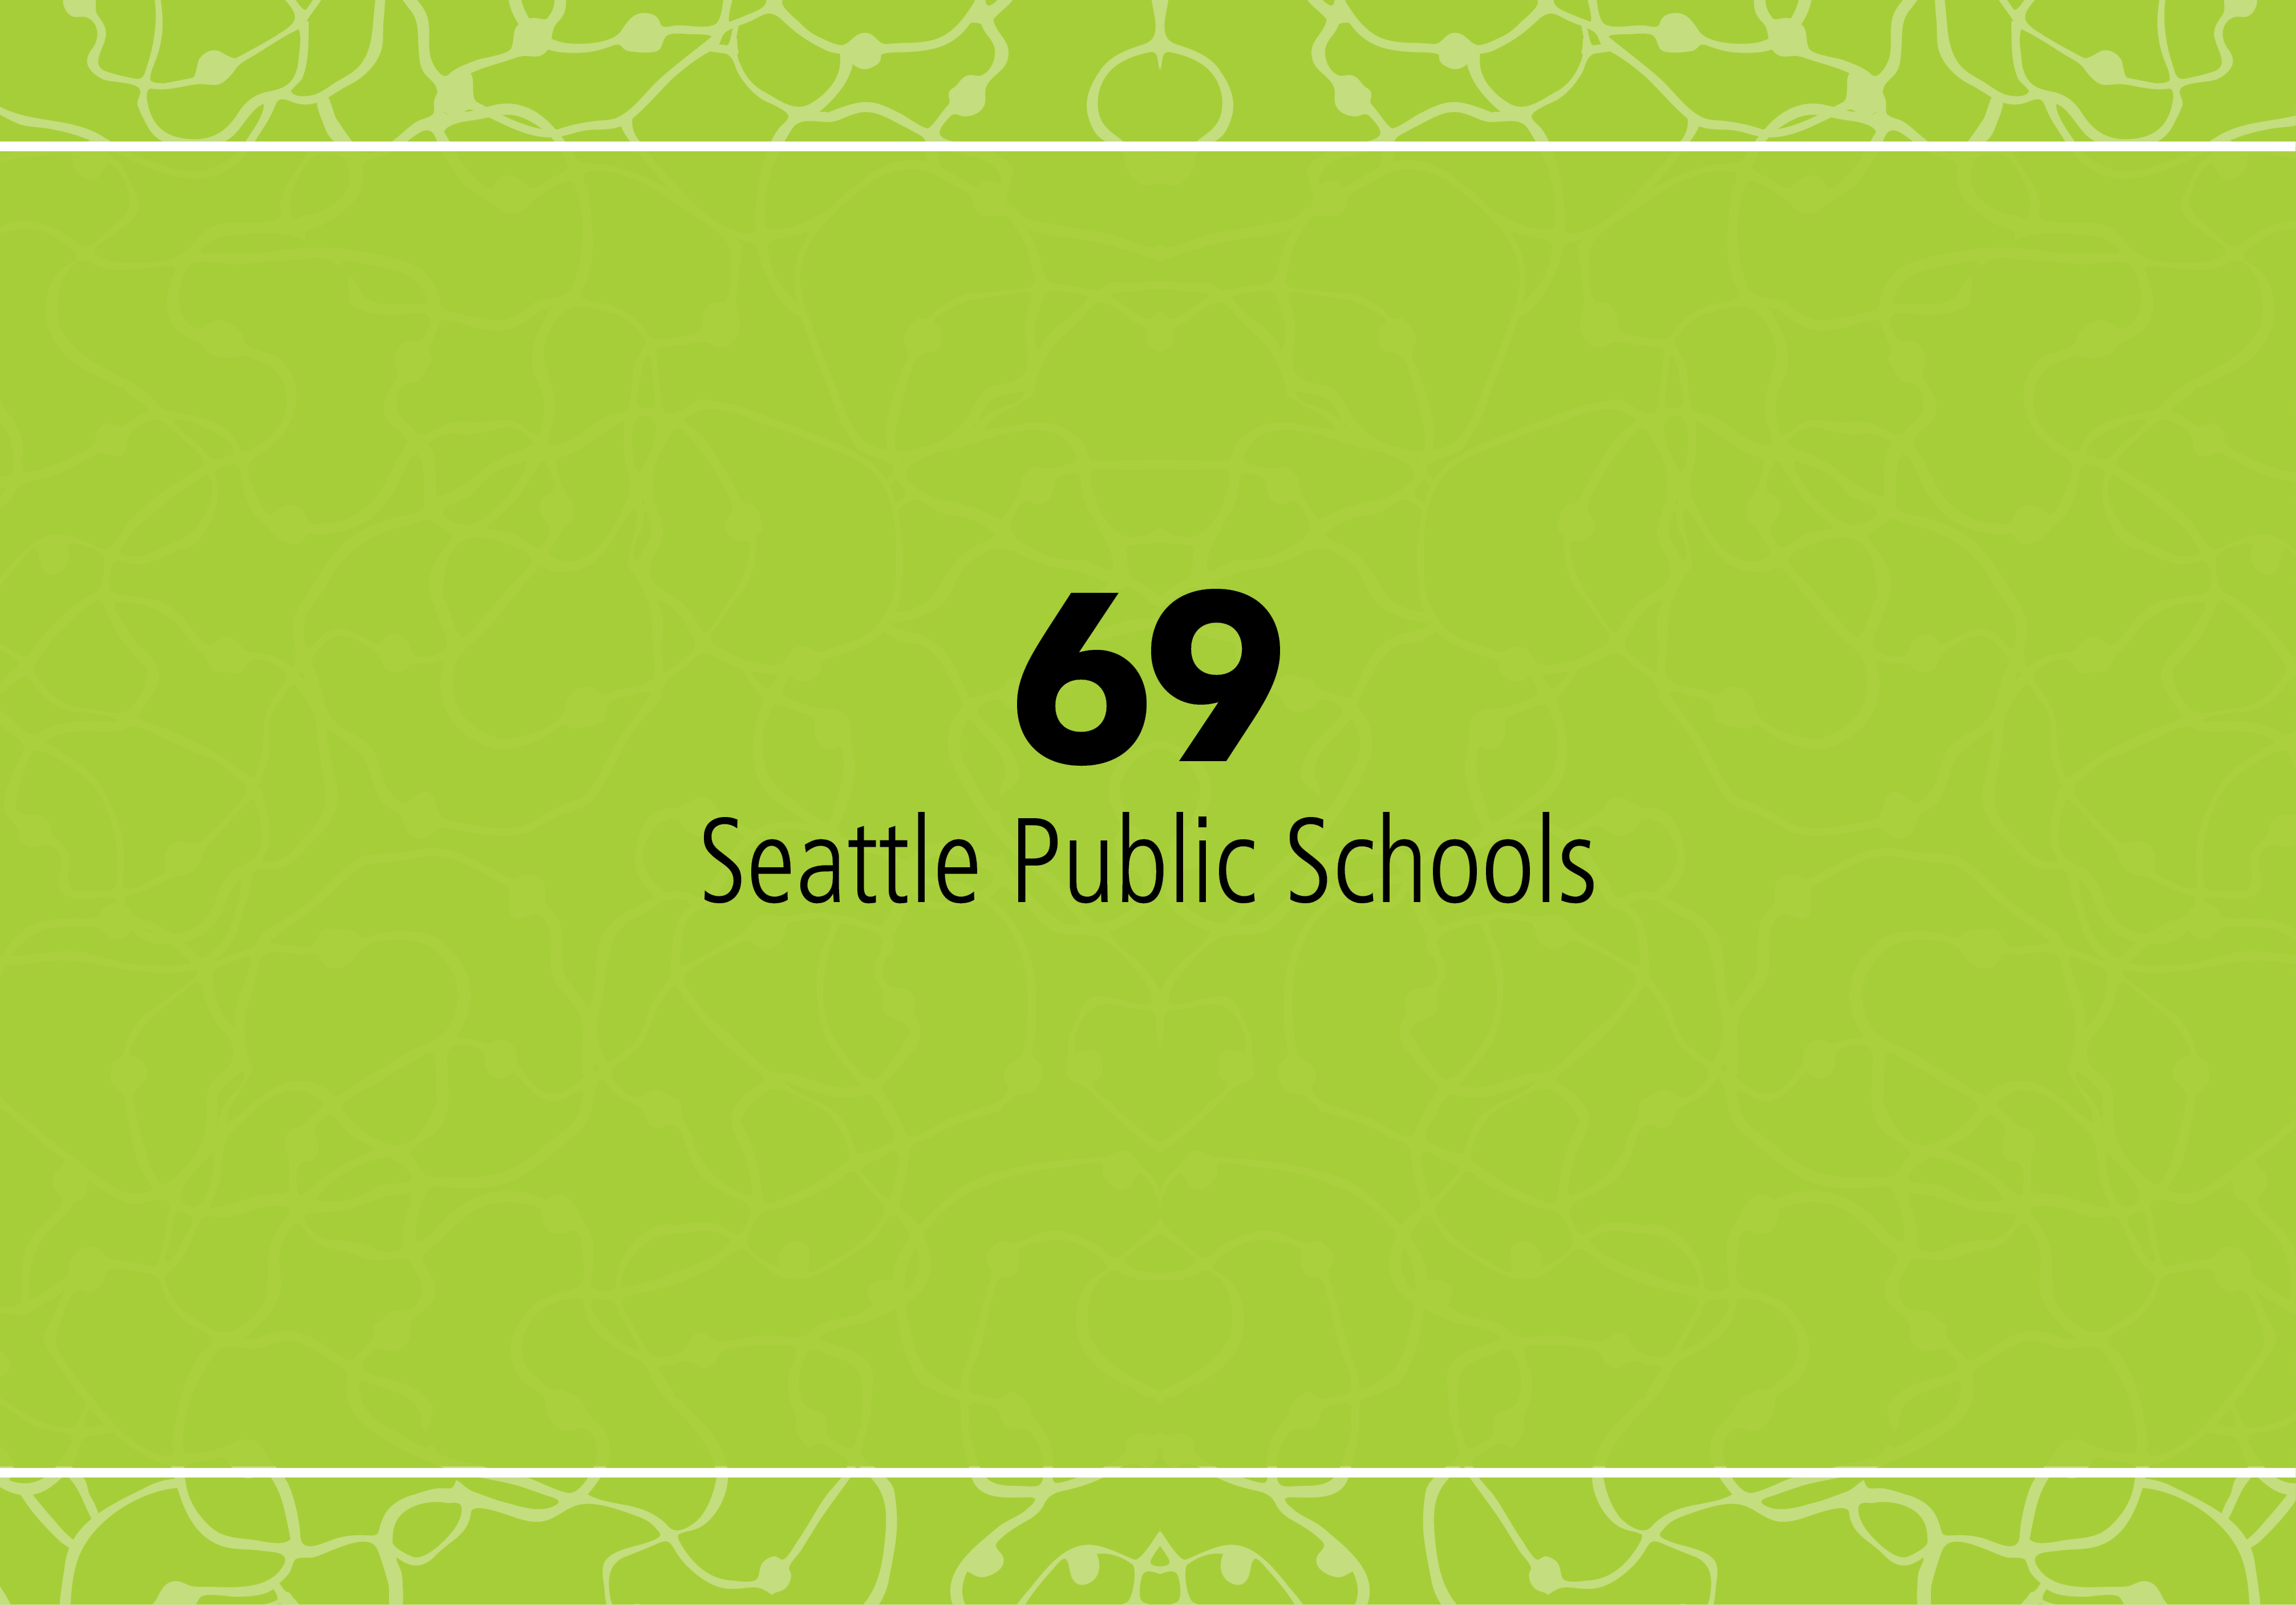 69 Seattle Public Schools participated in the Global Reading Challenge in 2018